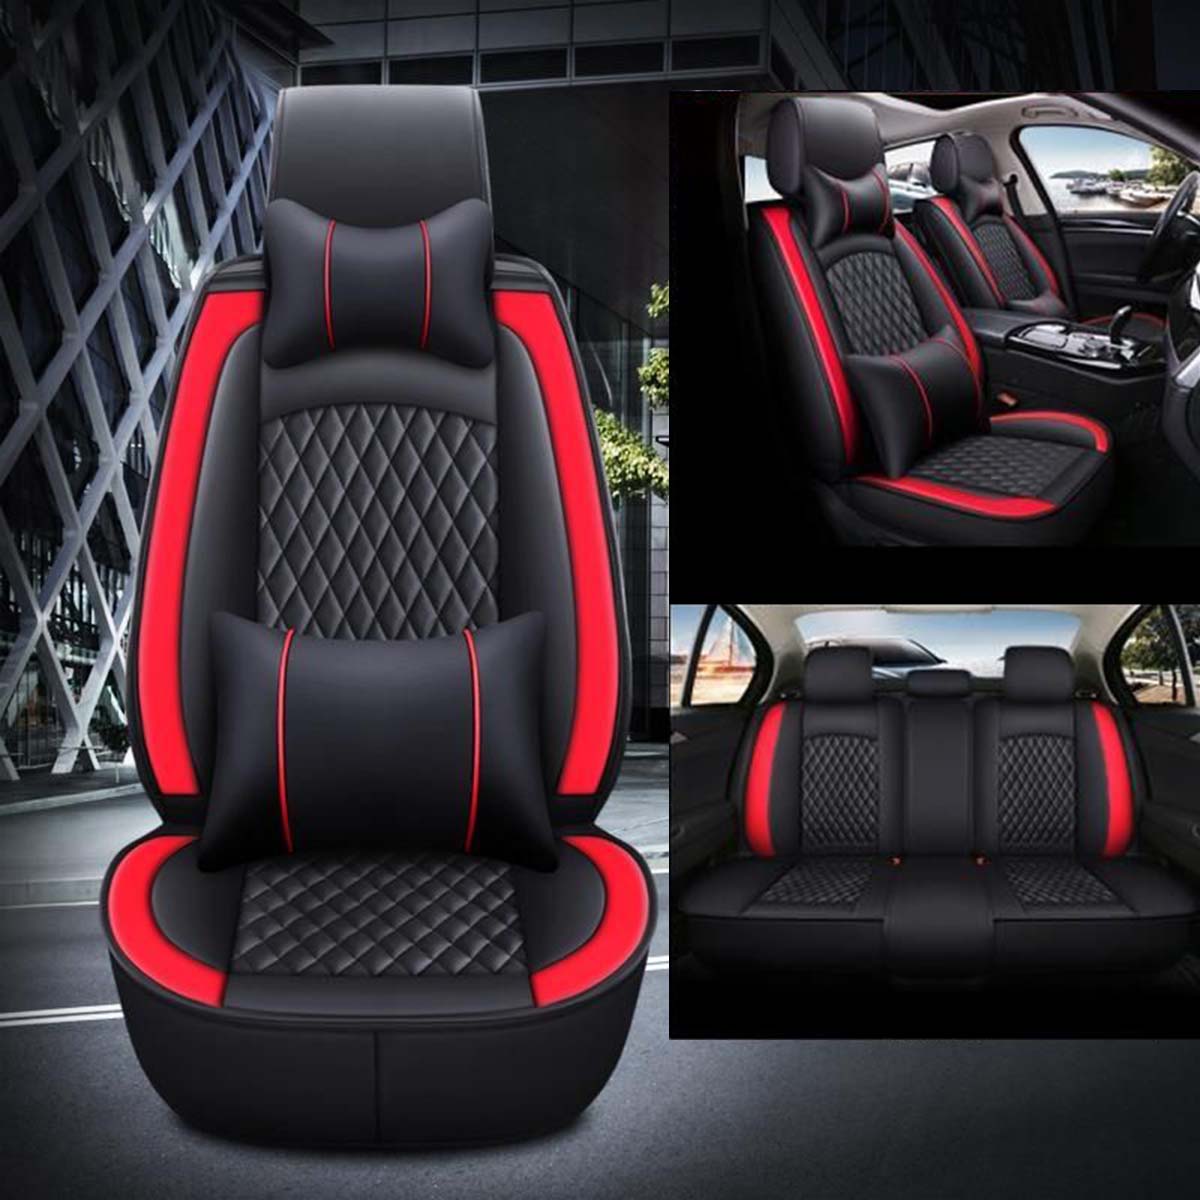 Tesla Car Seat Covers Full Set: Complete Protection and Style for Your Vehicle